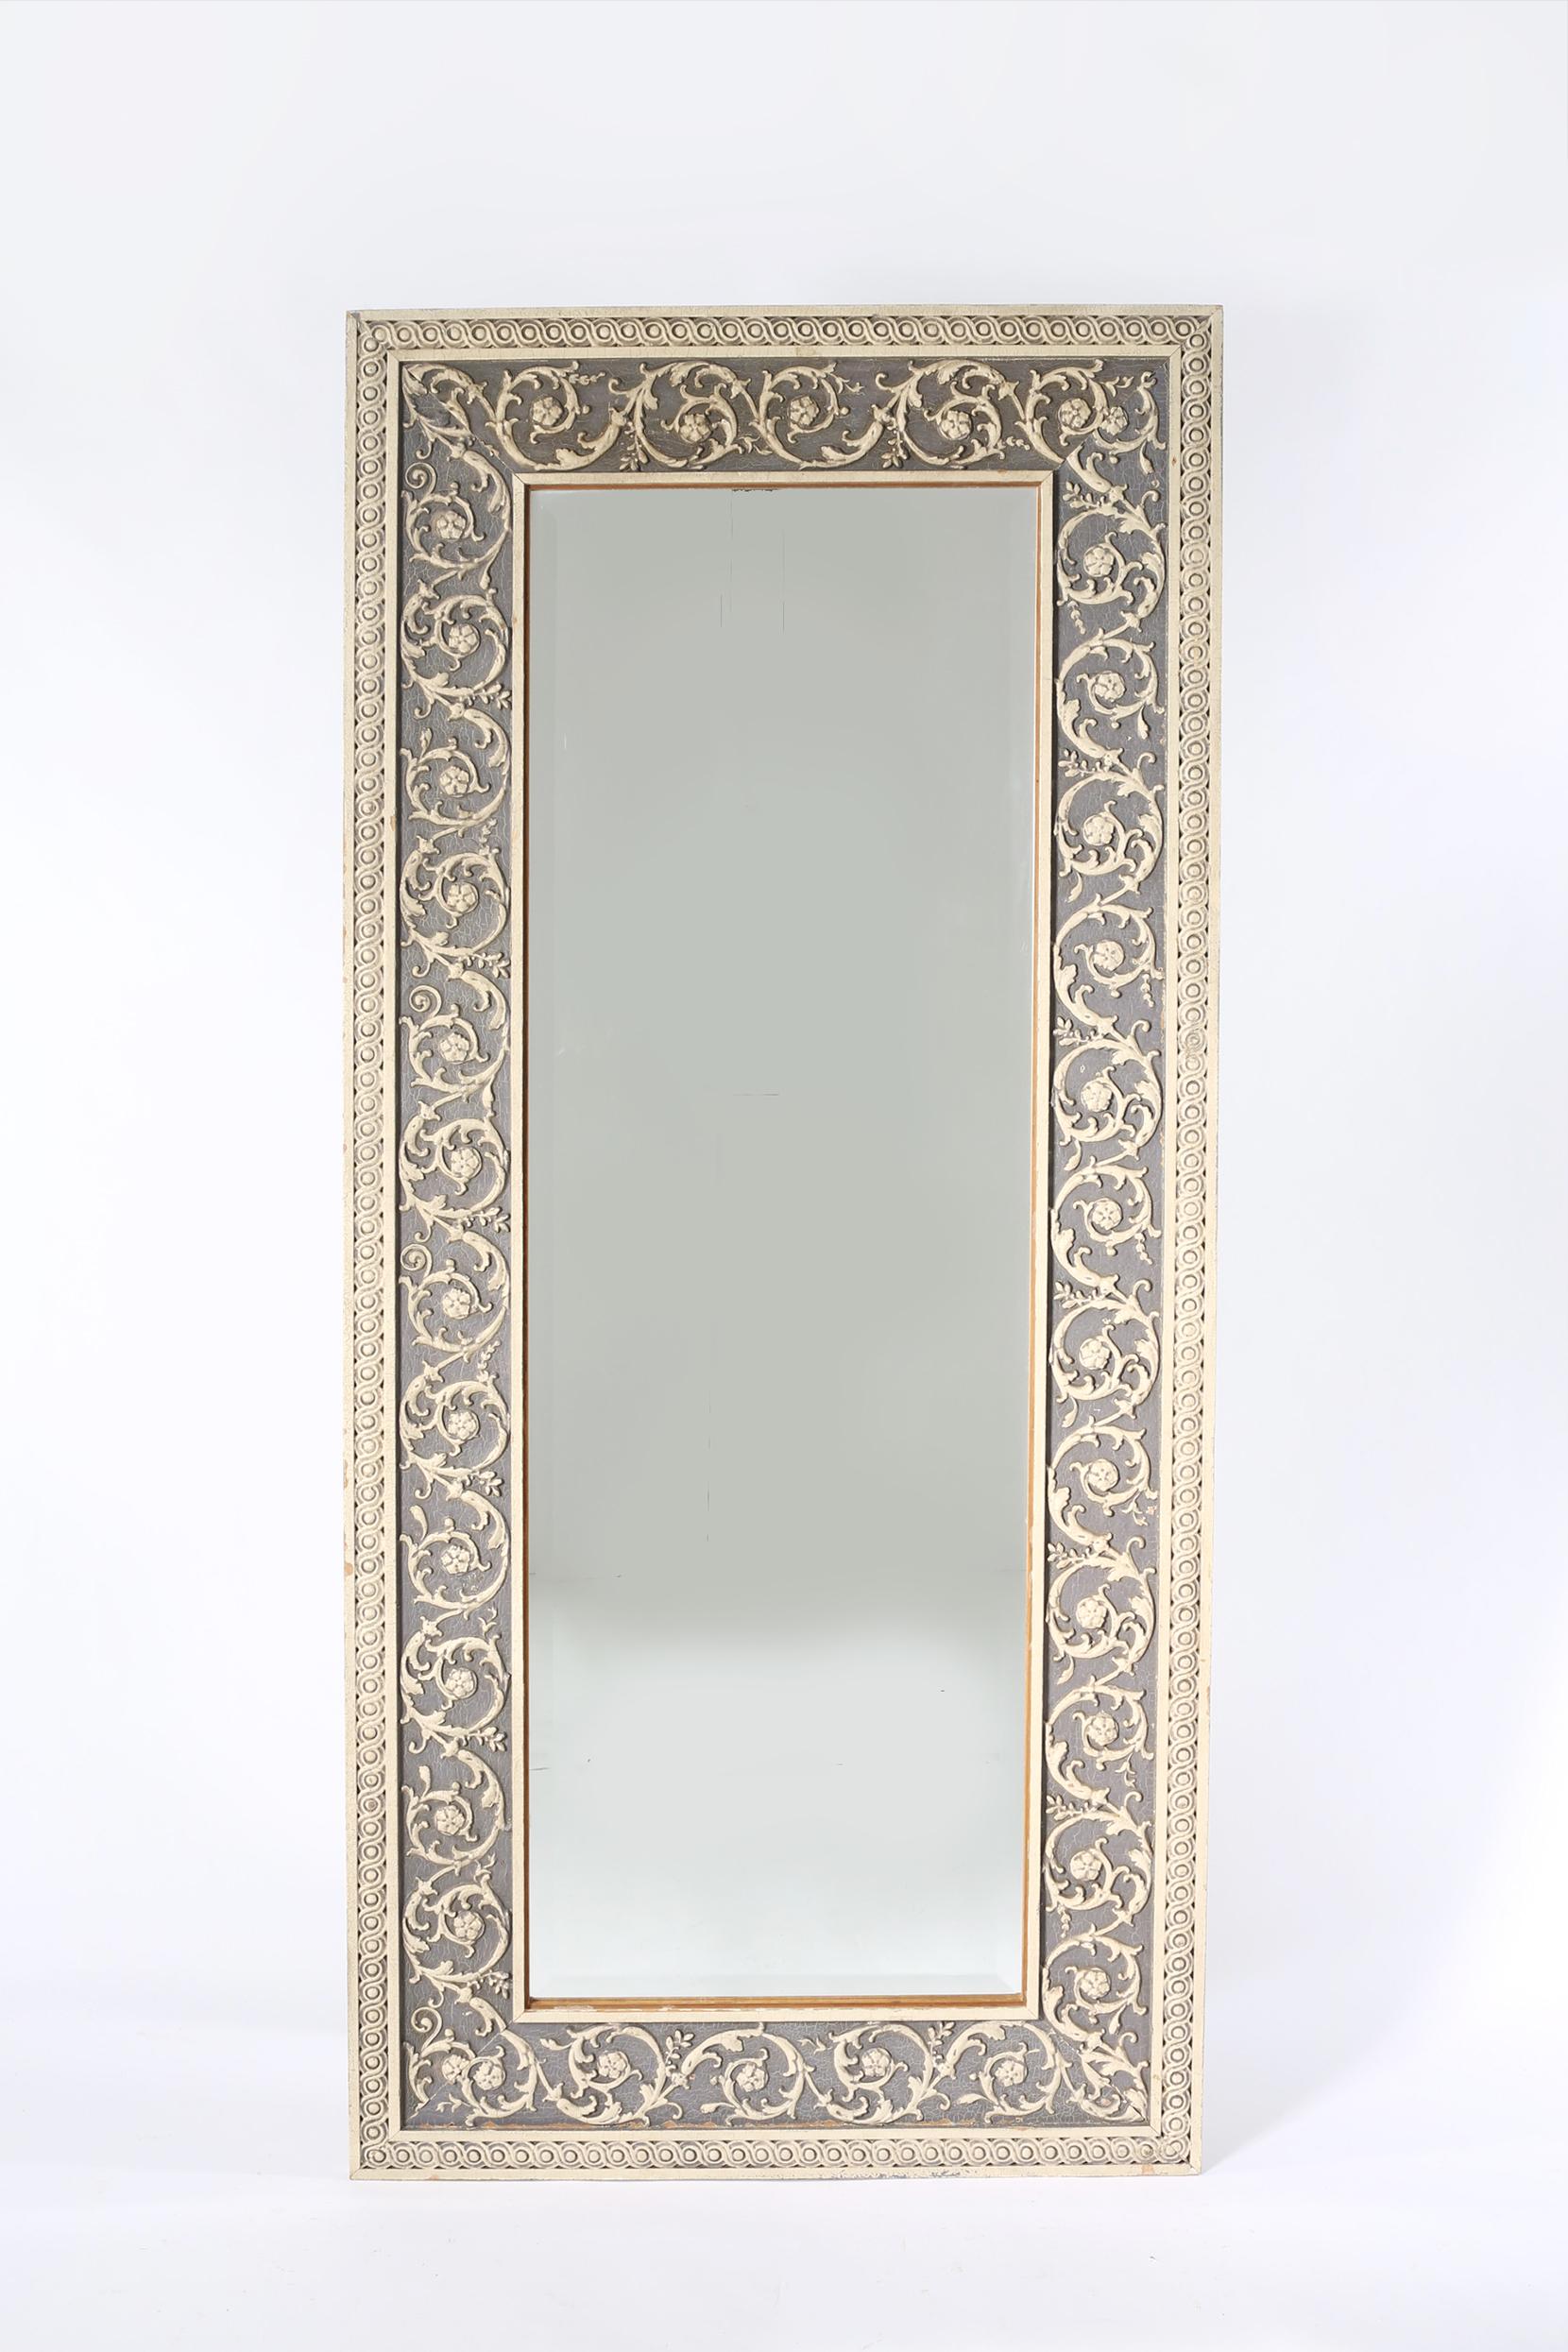 20th century wood framed floor length / hanging wall mirror. The mirror in in good condition with minor wear consistent with age / use. The mirror stand about 79 inches high x 36 inches wide x 2 inches deep.